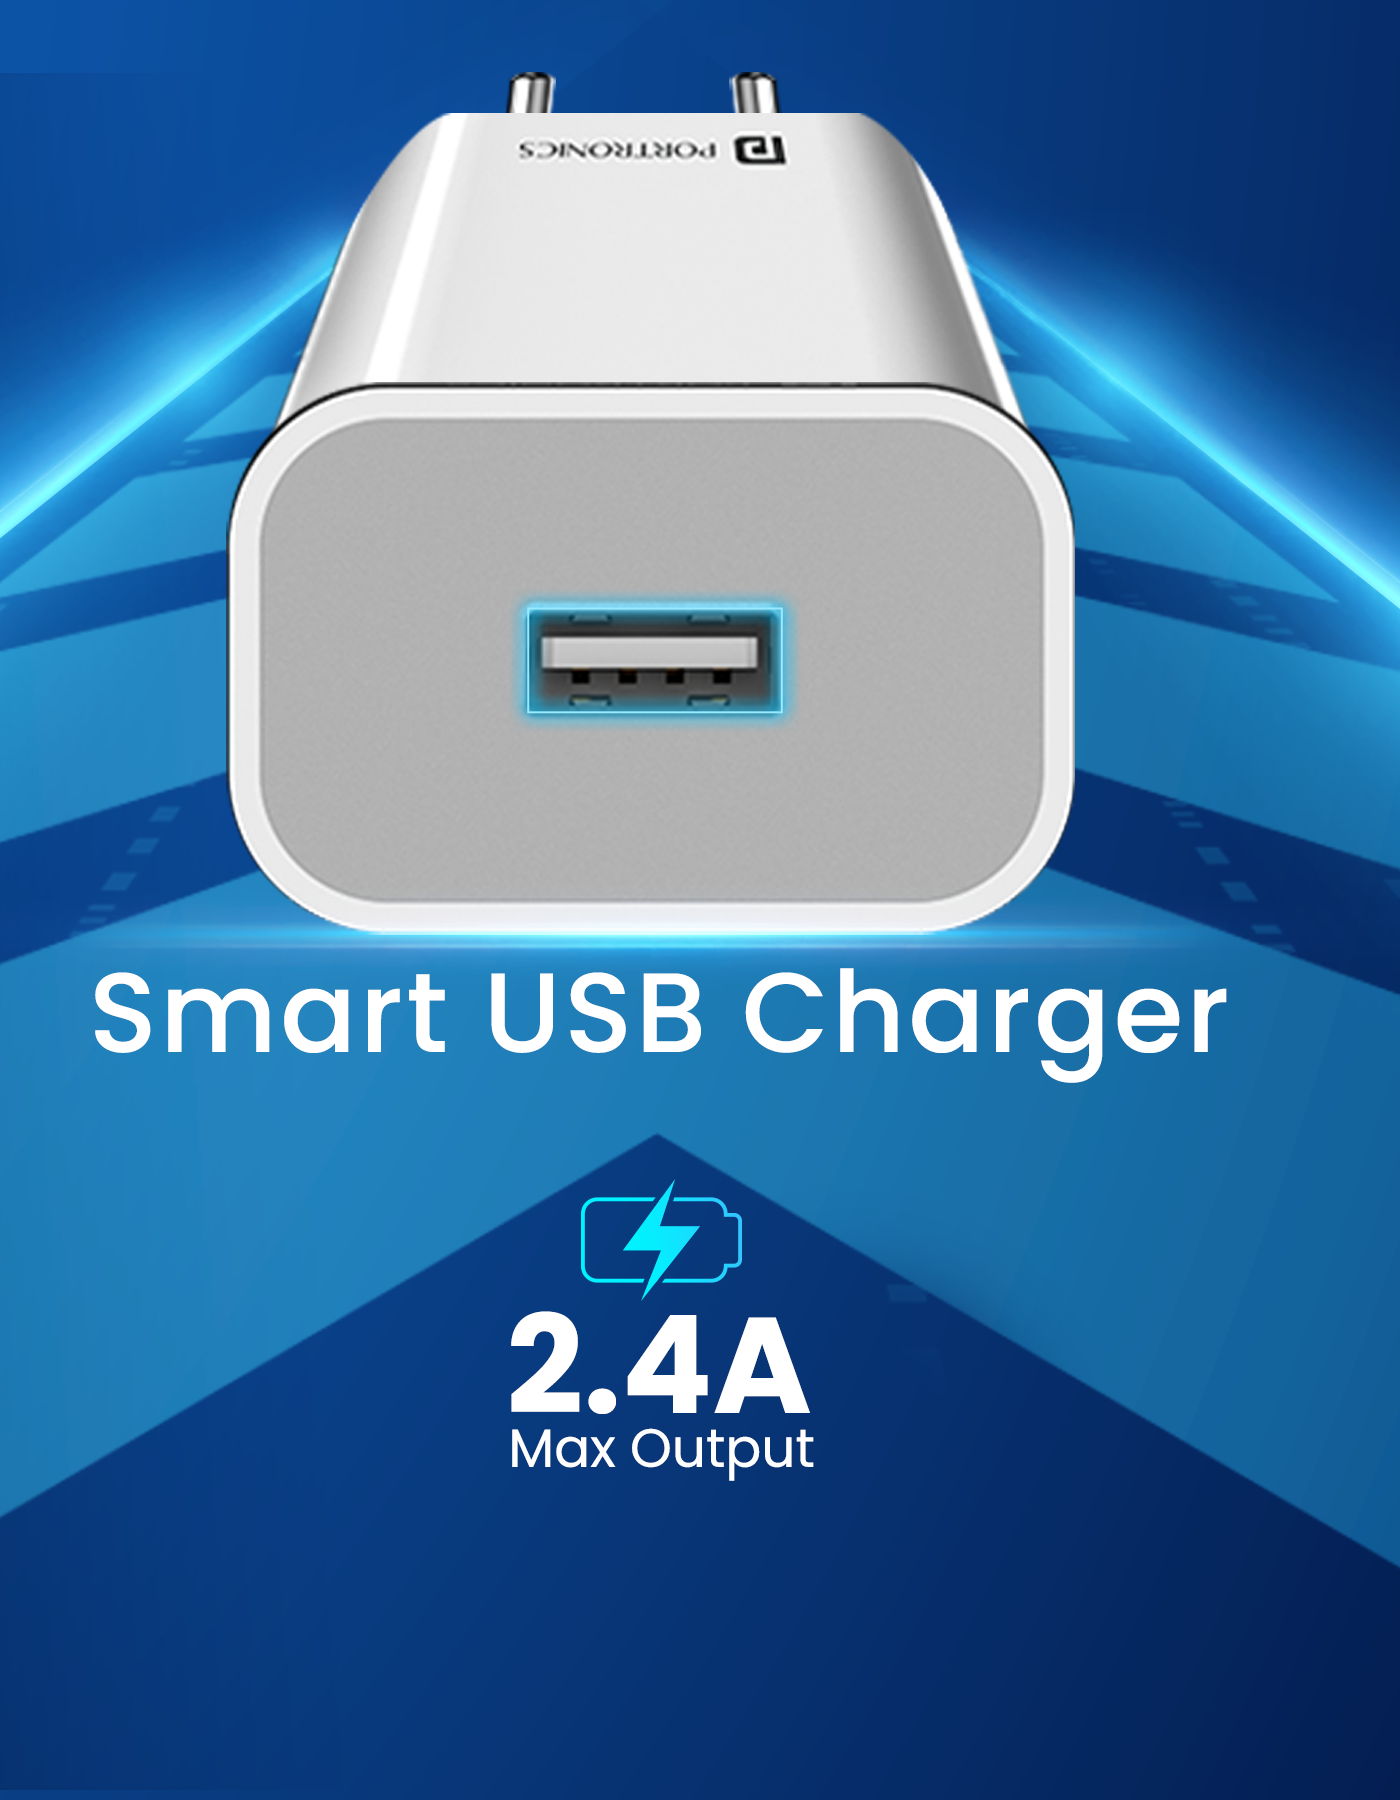 Adapto 12 - 12W Type-C PD Charger/Adapter with Fast Charging can charge android as well as I phone